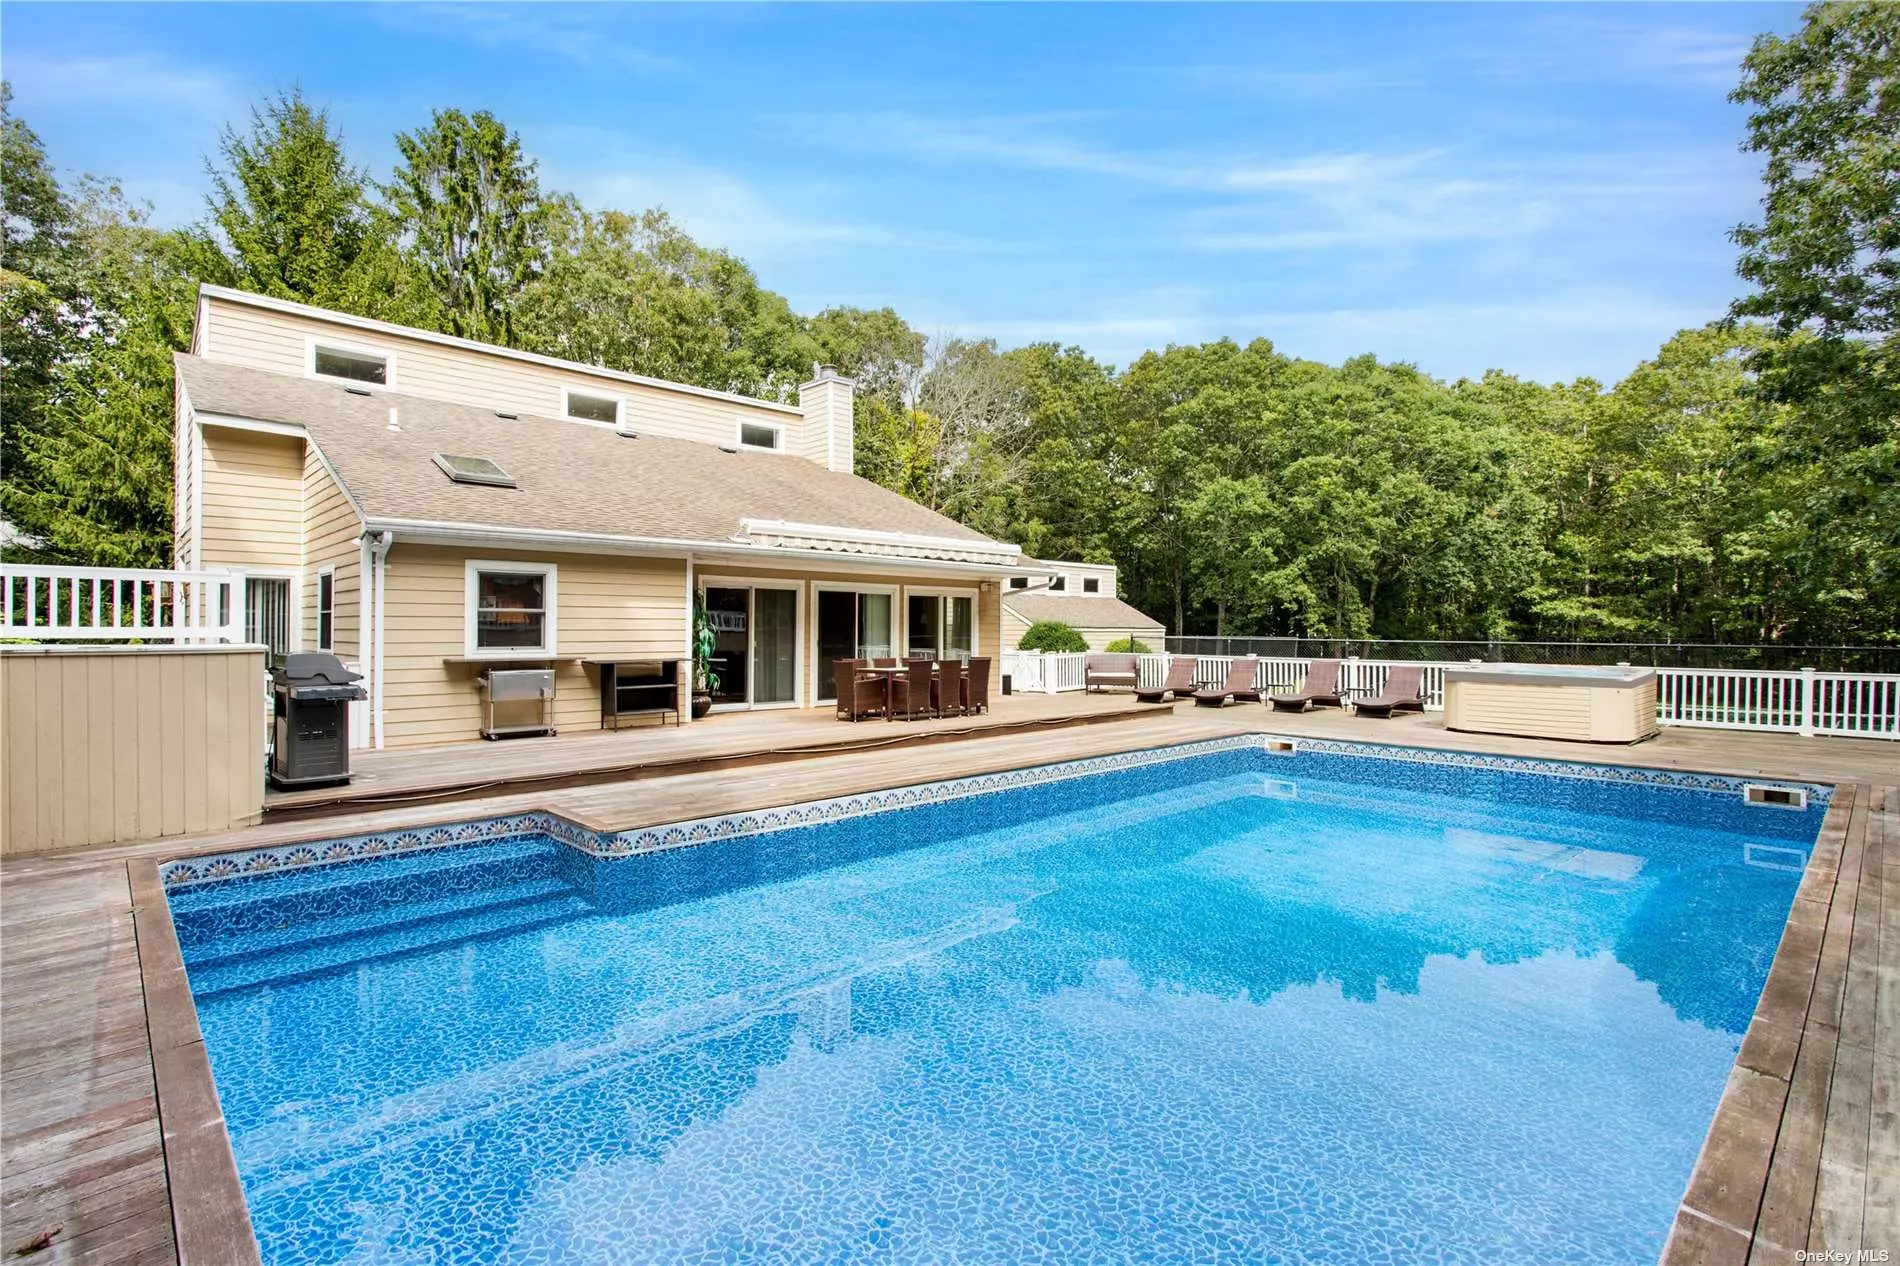 Nothing beats Summer in Quogue Village! This newly listed and fully equipped Hamptons Summer Getaway is now offering the ultimate Summer-in the Hamptons experience! Boasting 4, 000 sqft of modern living space with 4 spacious beds and 3 full baths, along with its Resort Style amenities which include your heated pool, jacuzzi and full sized tennis. Additional highlights include your Chefs Kitchen, multiple lounge areas and expansive oversized entertainment spaces ideal for entertaining all summer long. Located within minutes of world renowned Quogue Village Beach. Now available for June 2024